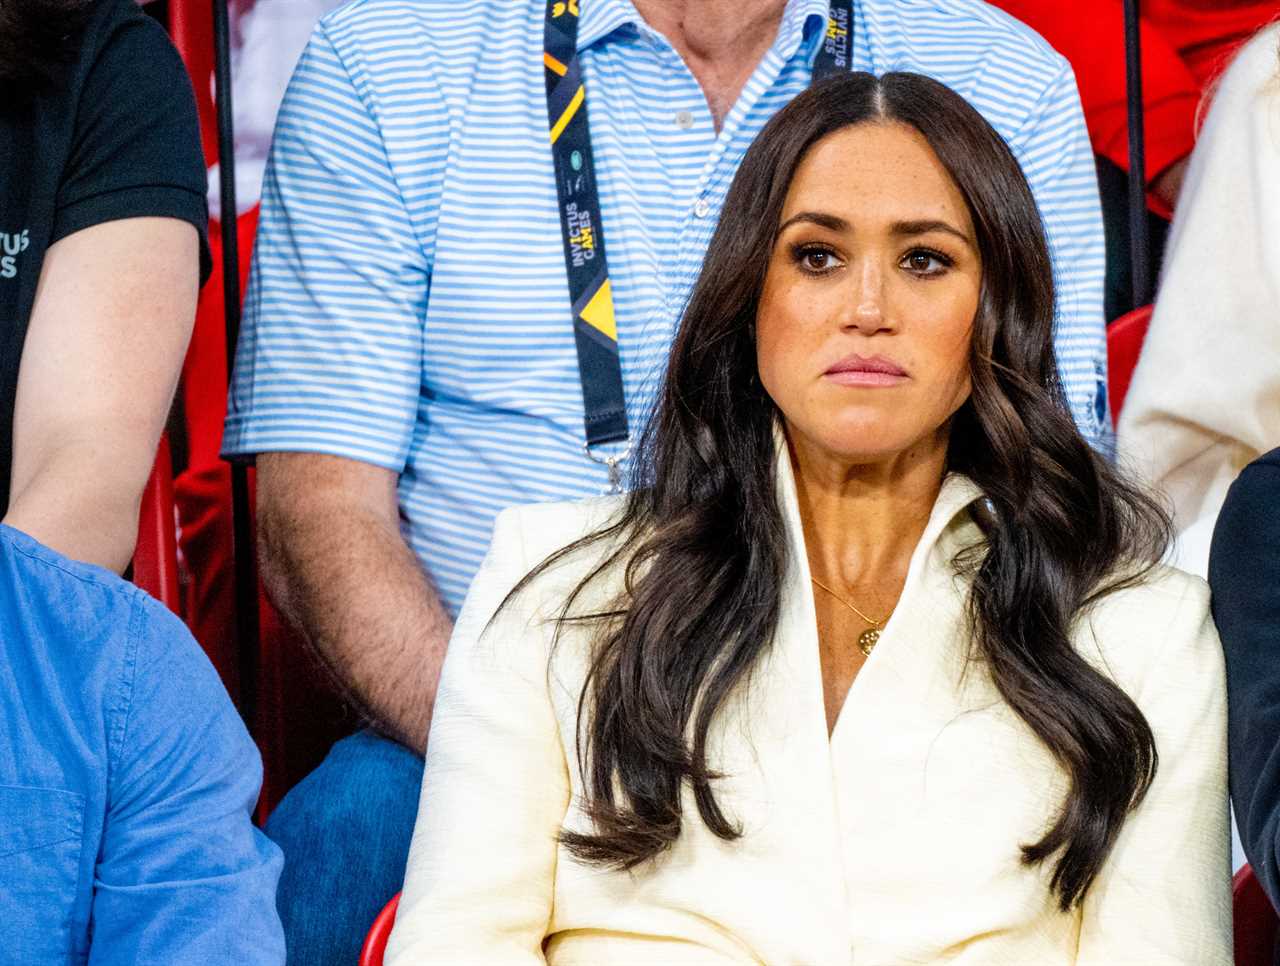 I was ‘bullied’ by Meghan Markle while working as a Buckingham Palace aide – I’m scared she wants to take me to court